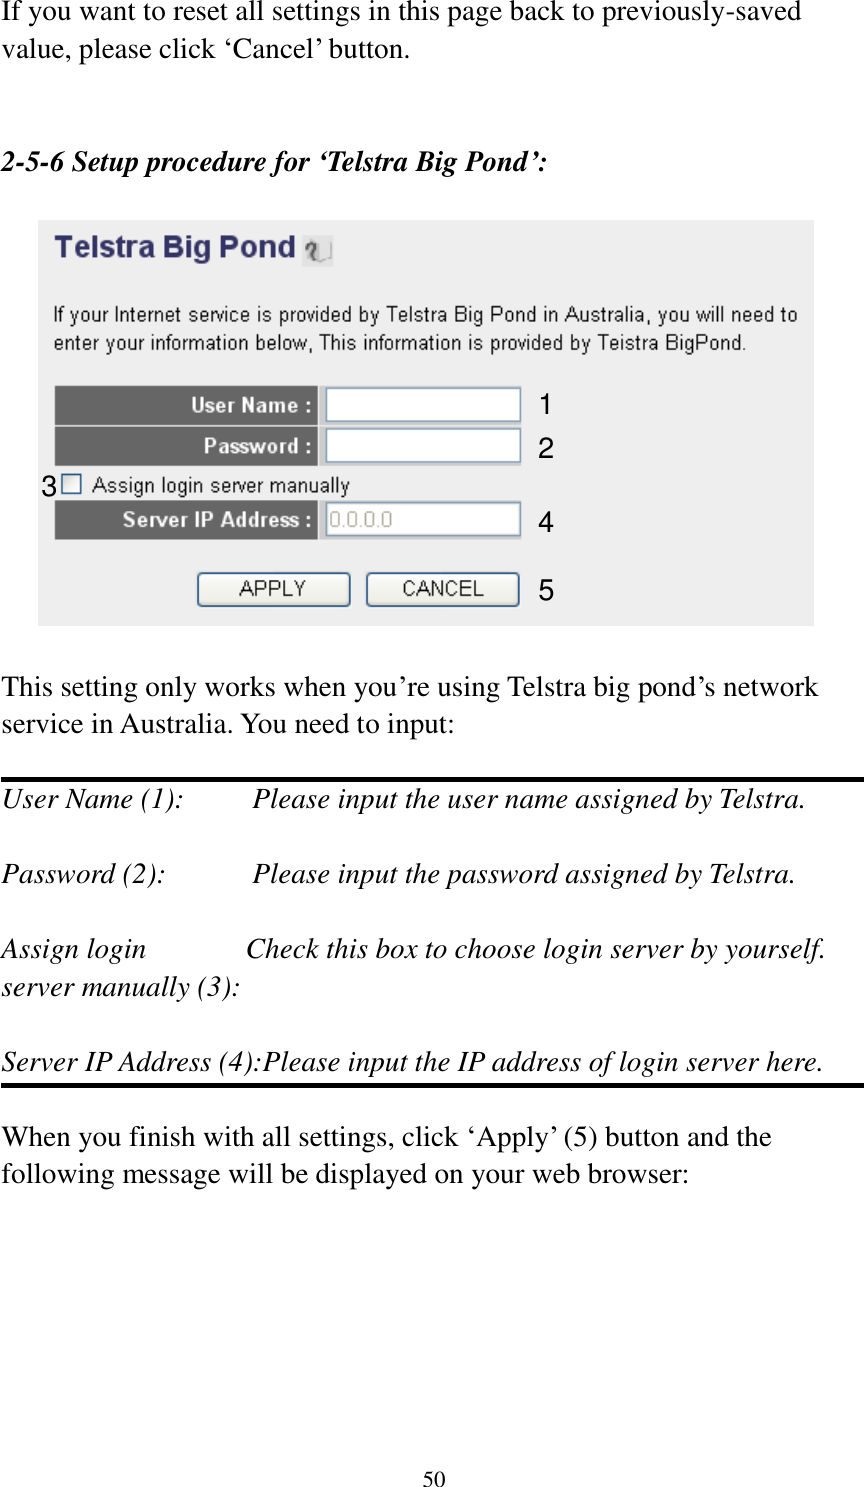 50 If you want to reset all settings in this page back to previously-saved value, please click „Cancel‟ button.   2-5-6 Setup procedure for ‘Telstra Big Pond’:    This setting only works when you‟re using Telstra big pond‟s network service in Australia. You need to input:  User Name (1):     Please input the user name assigned by Telstra.  Password (2):      Please input the password assigned by Telstra.  Assign login       Check this box to choose login server by yourself. server manually (3):    Server IP Address (4):Please input the IP address of login server here.  When you finish with all settings, click „Apply‟ (5) button and the following message will be displayed on your web browser:  1 2 3 4 5 